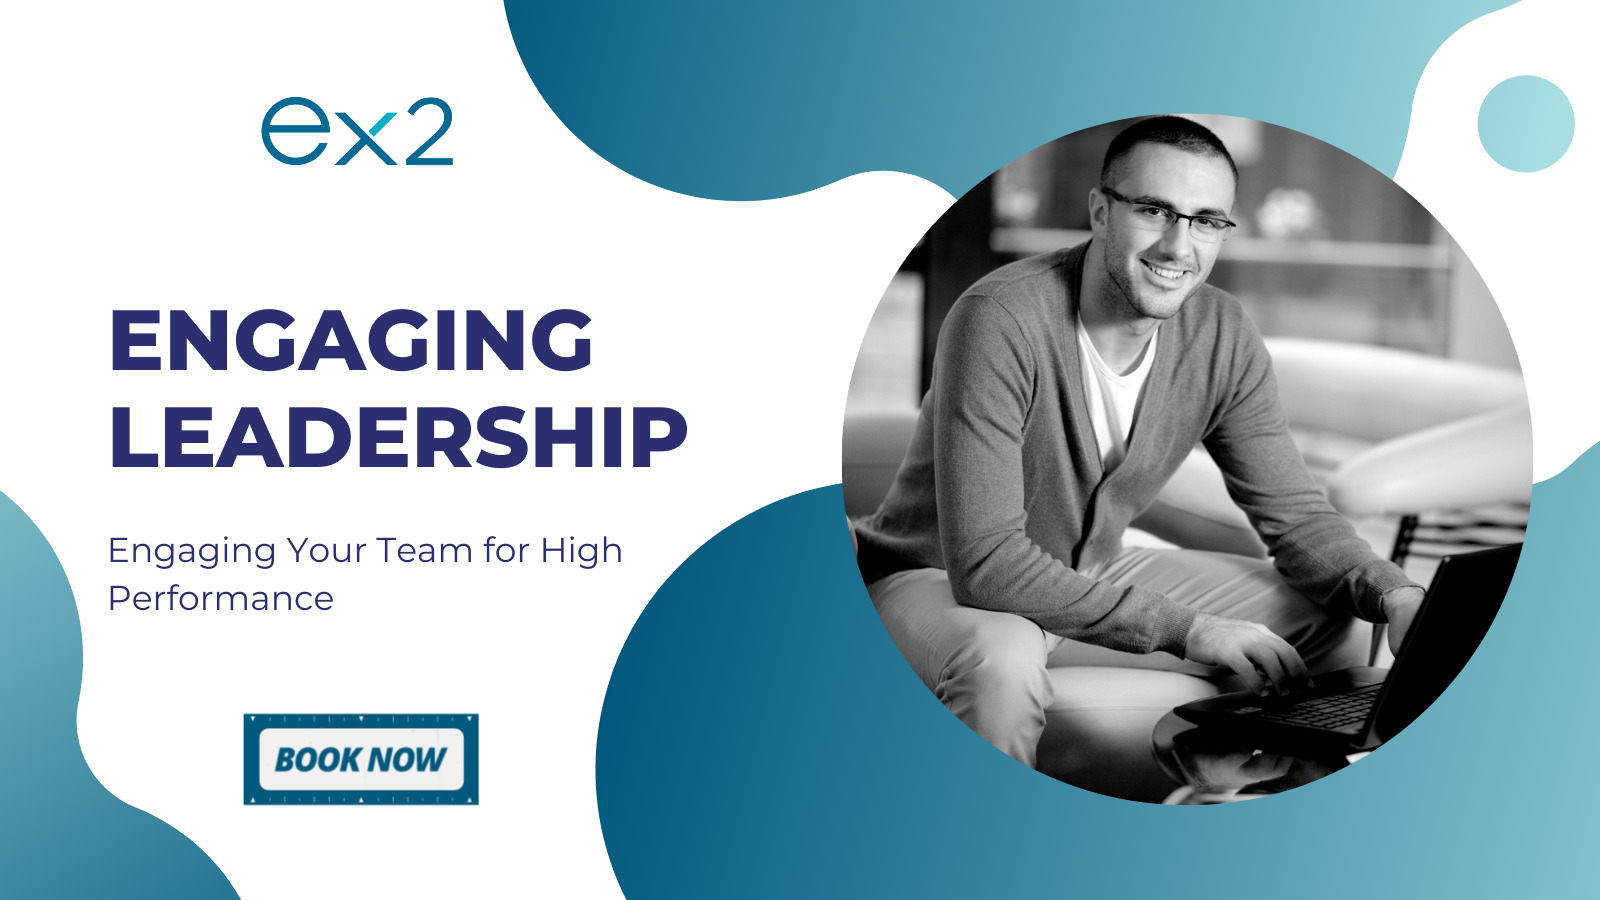 Engaging leadership. 1 day training course to engage and motivate your team.